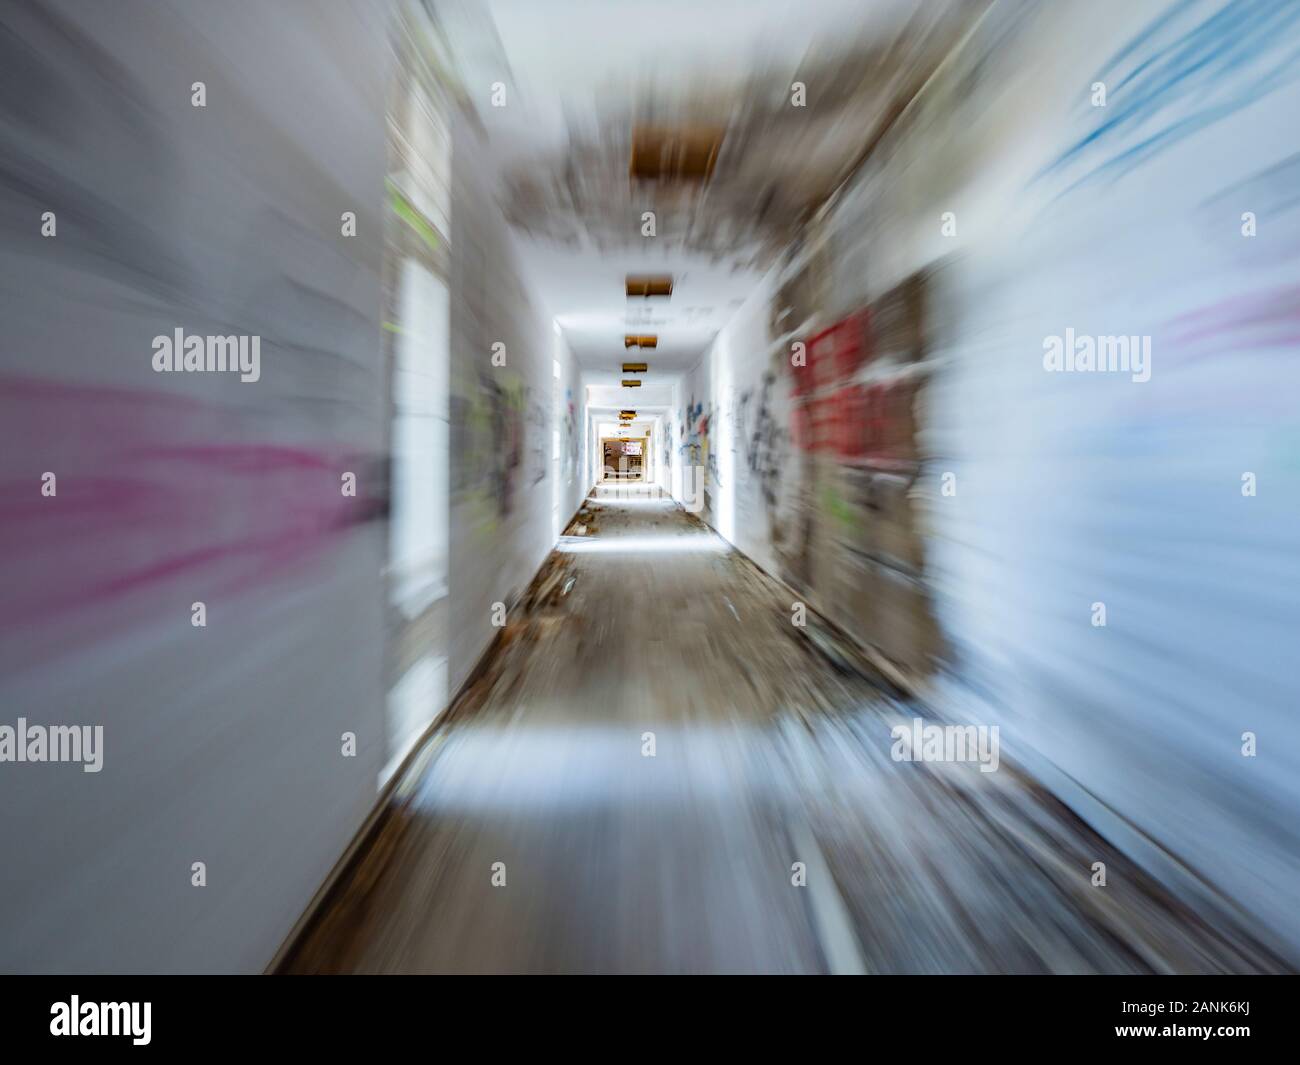 Running through corridor abandoned house colored patches patchy walls Stock Photo